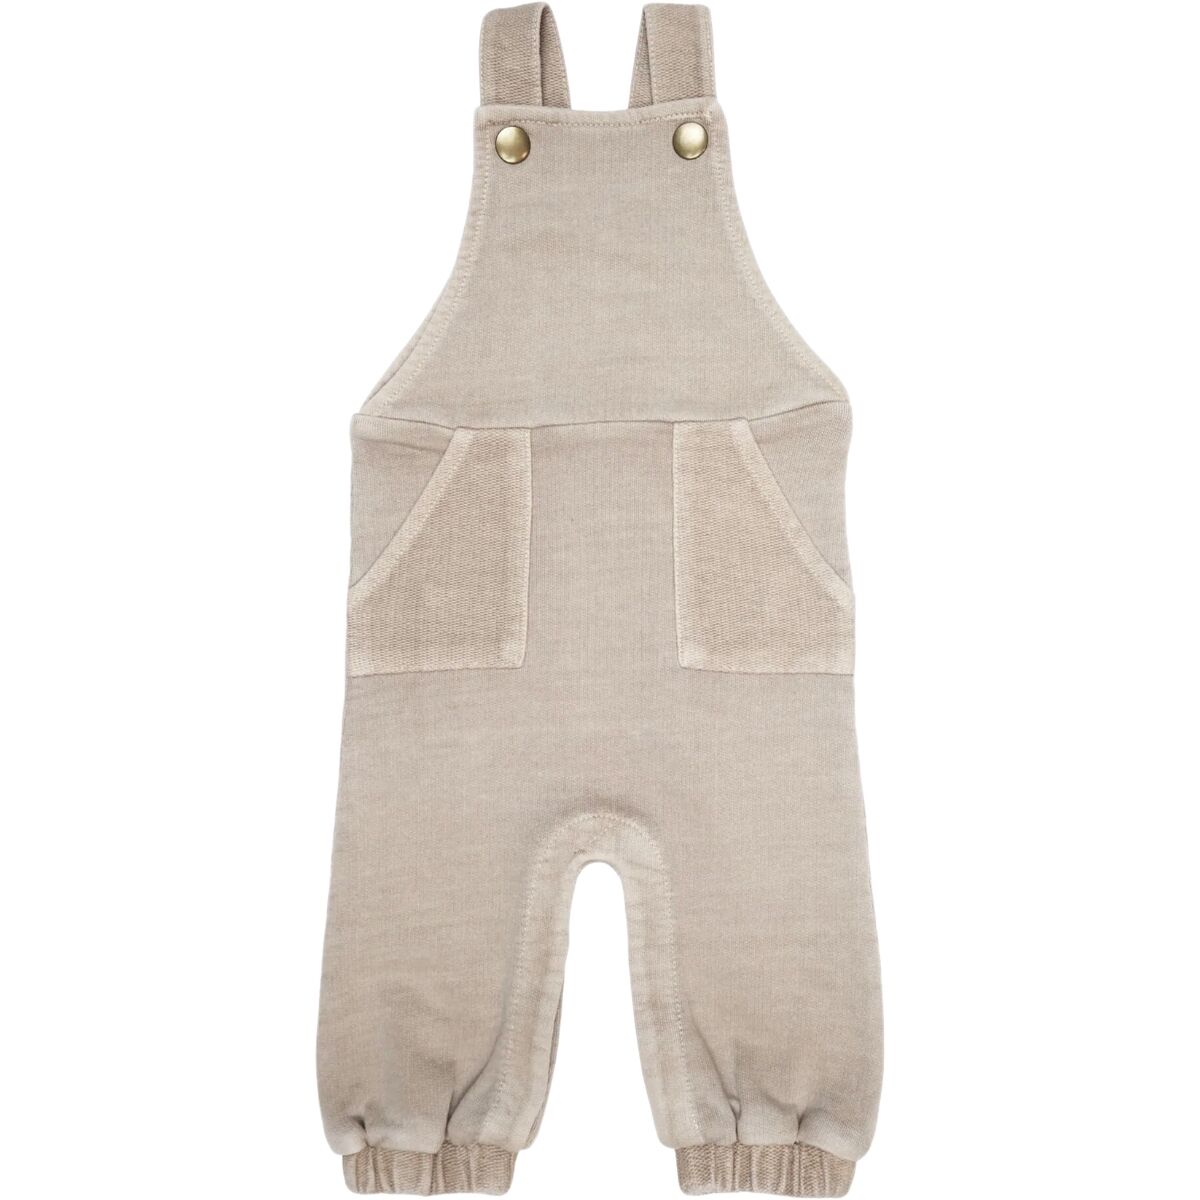 L'oved Baby French Terry Overall Romper - Infants'